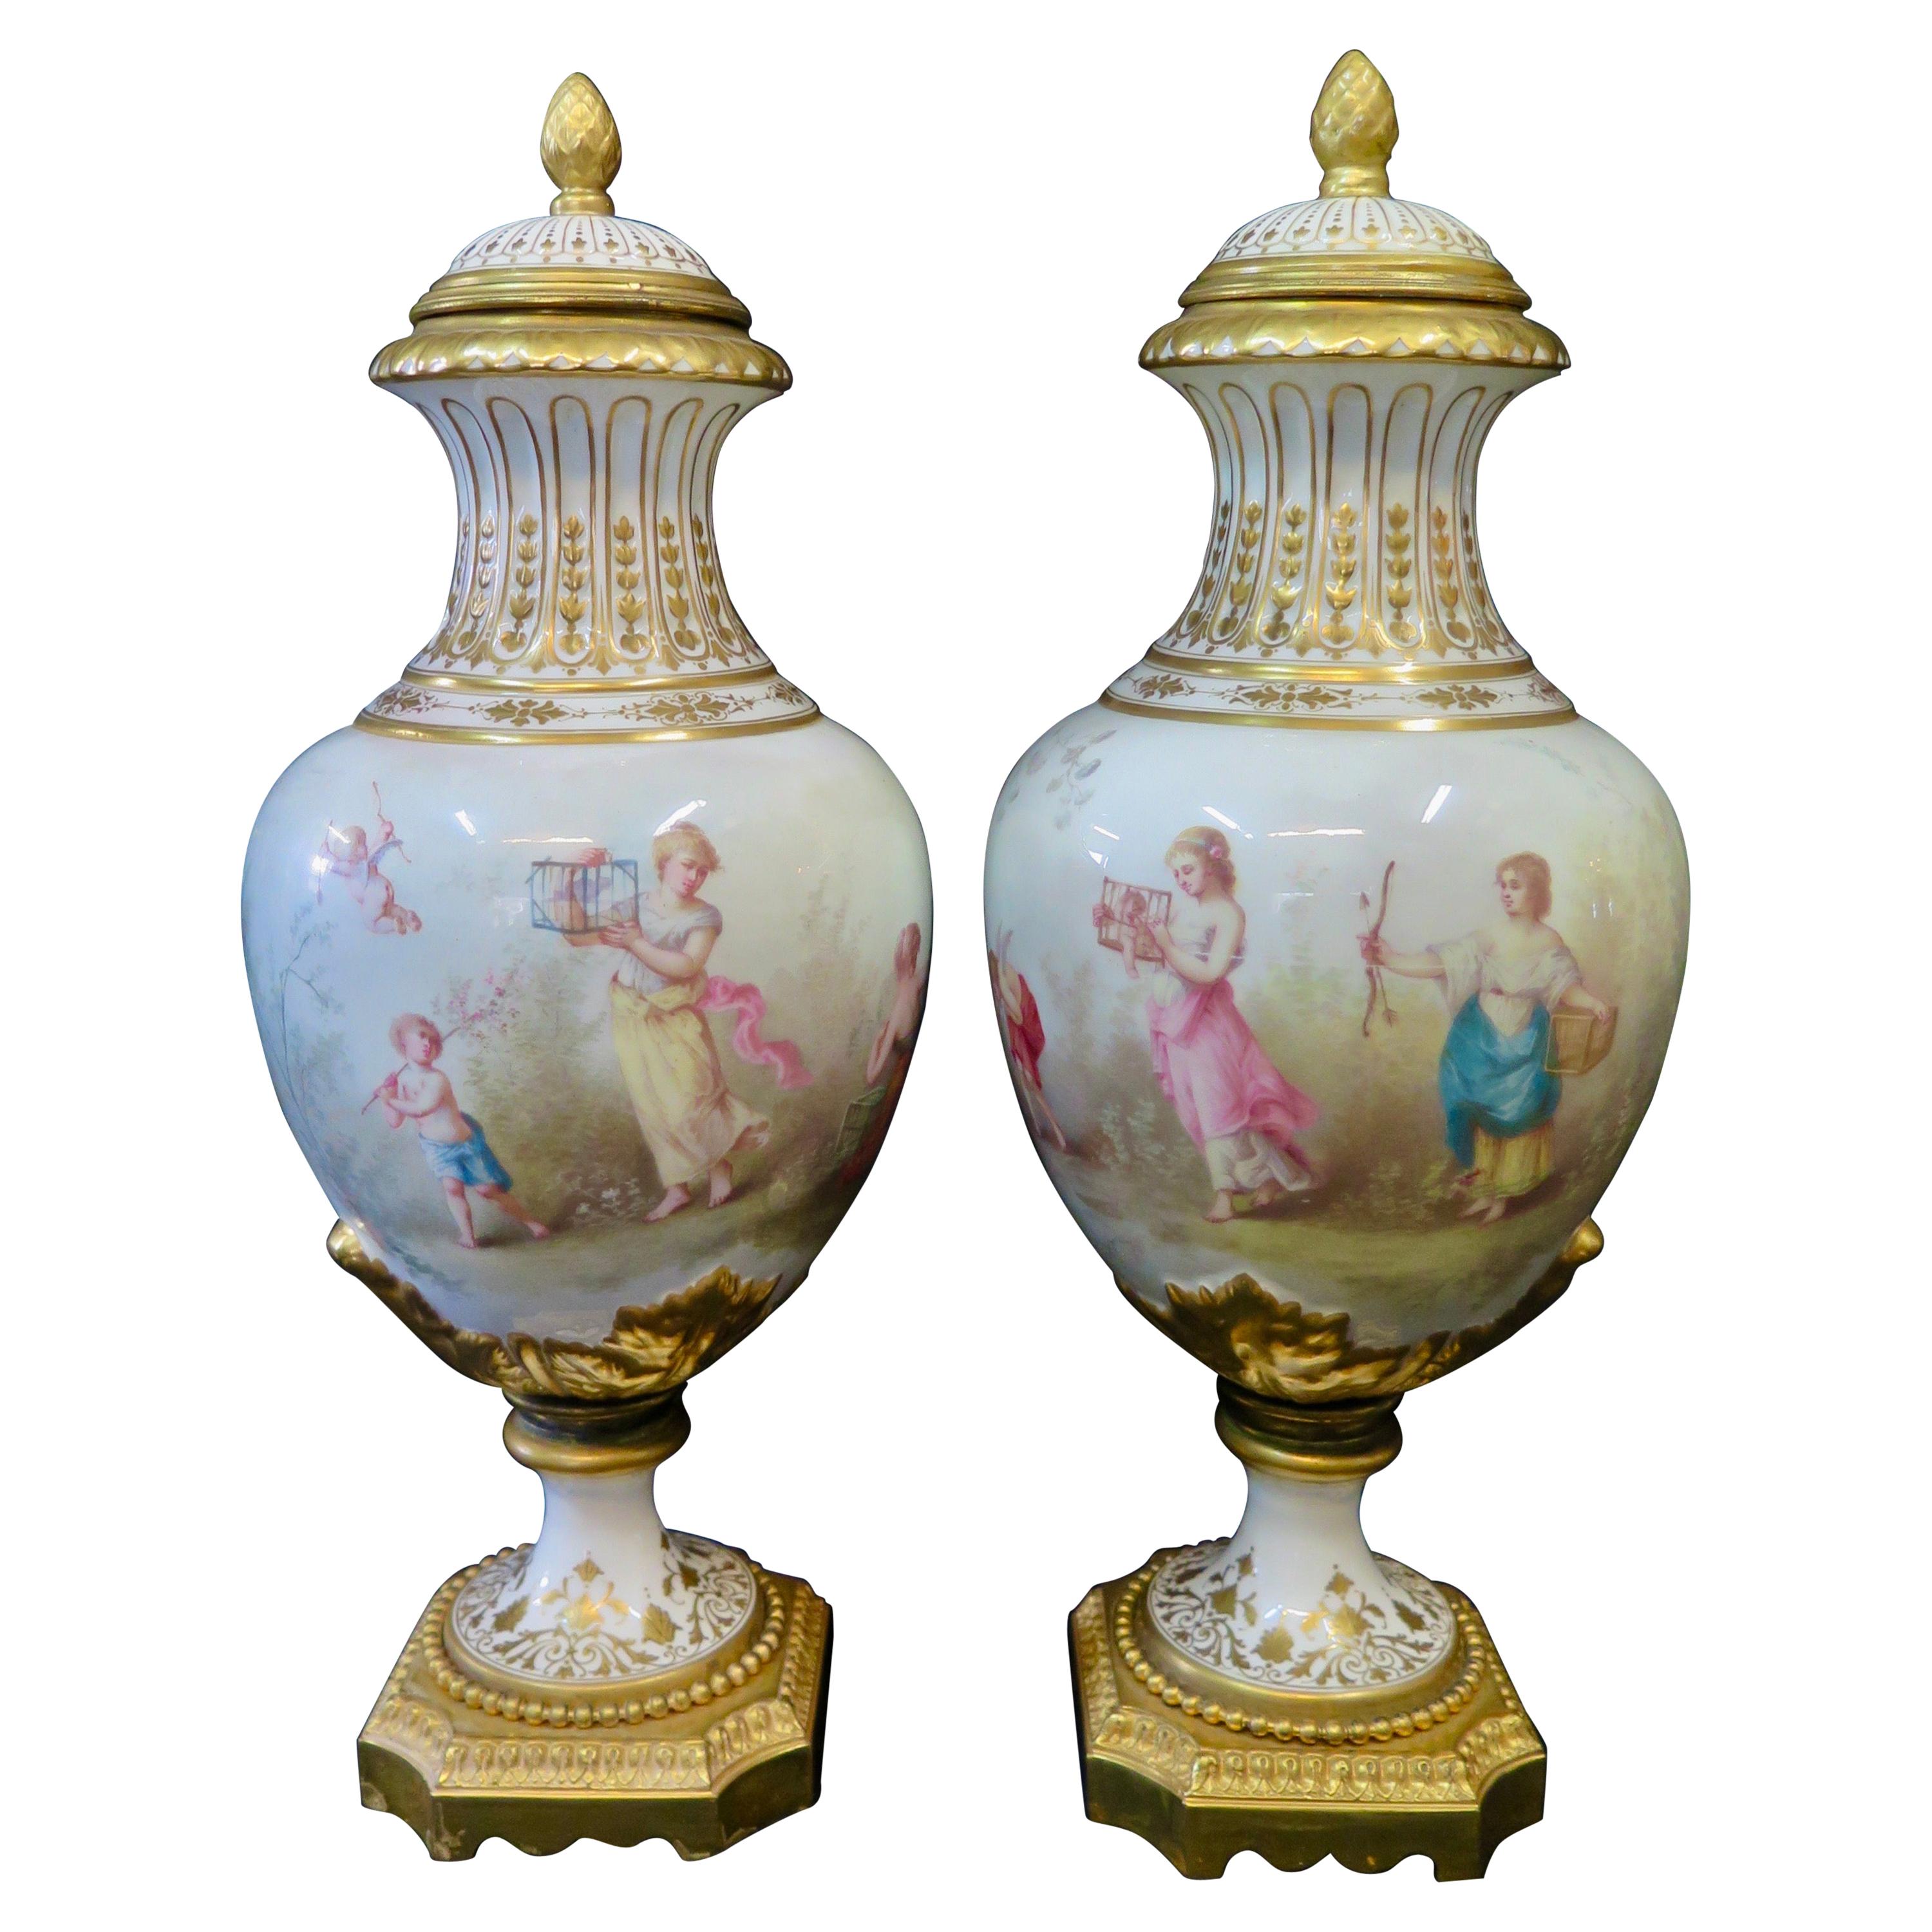 Covered Urns 'attributed to Sevres'